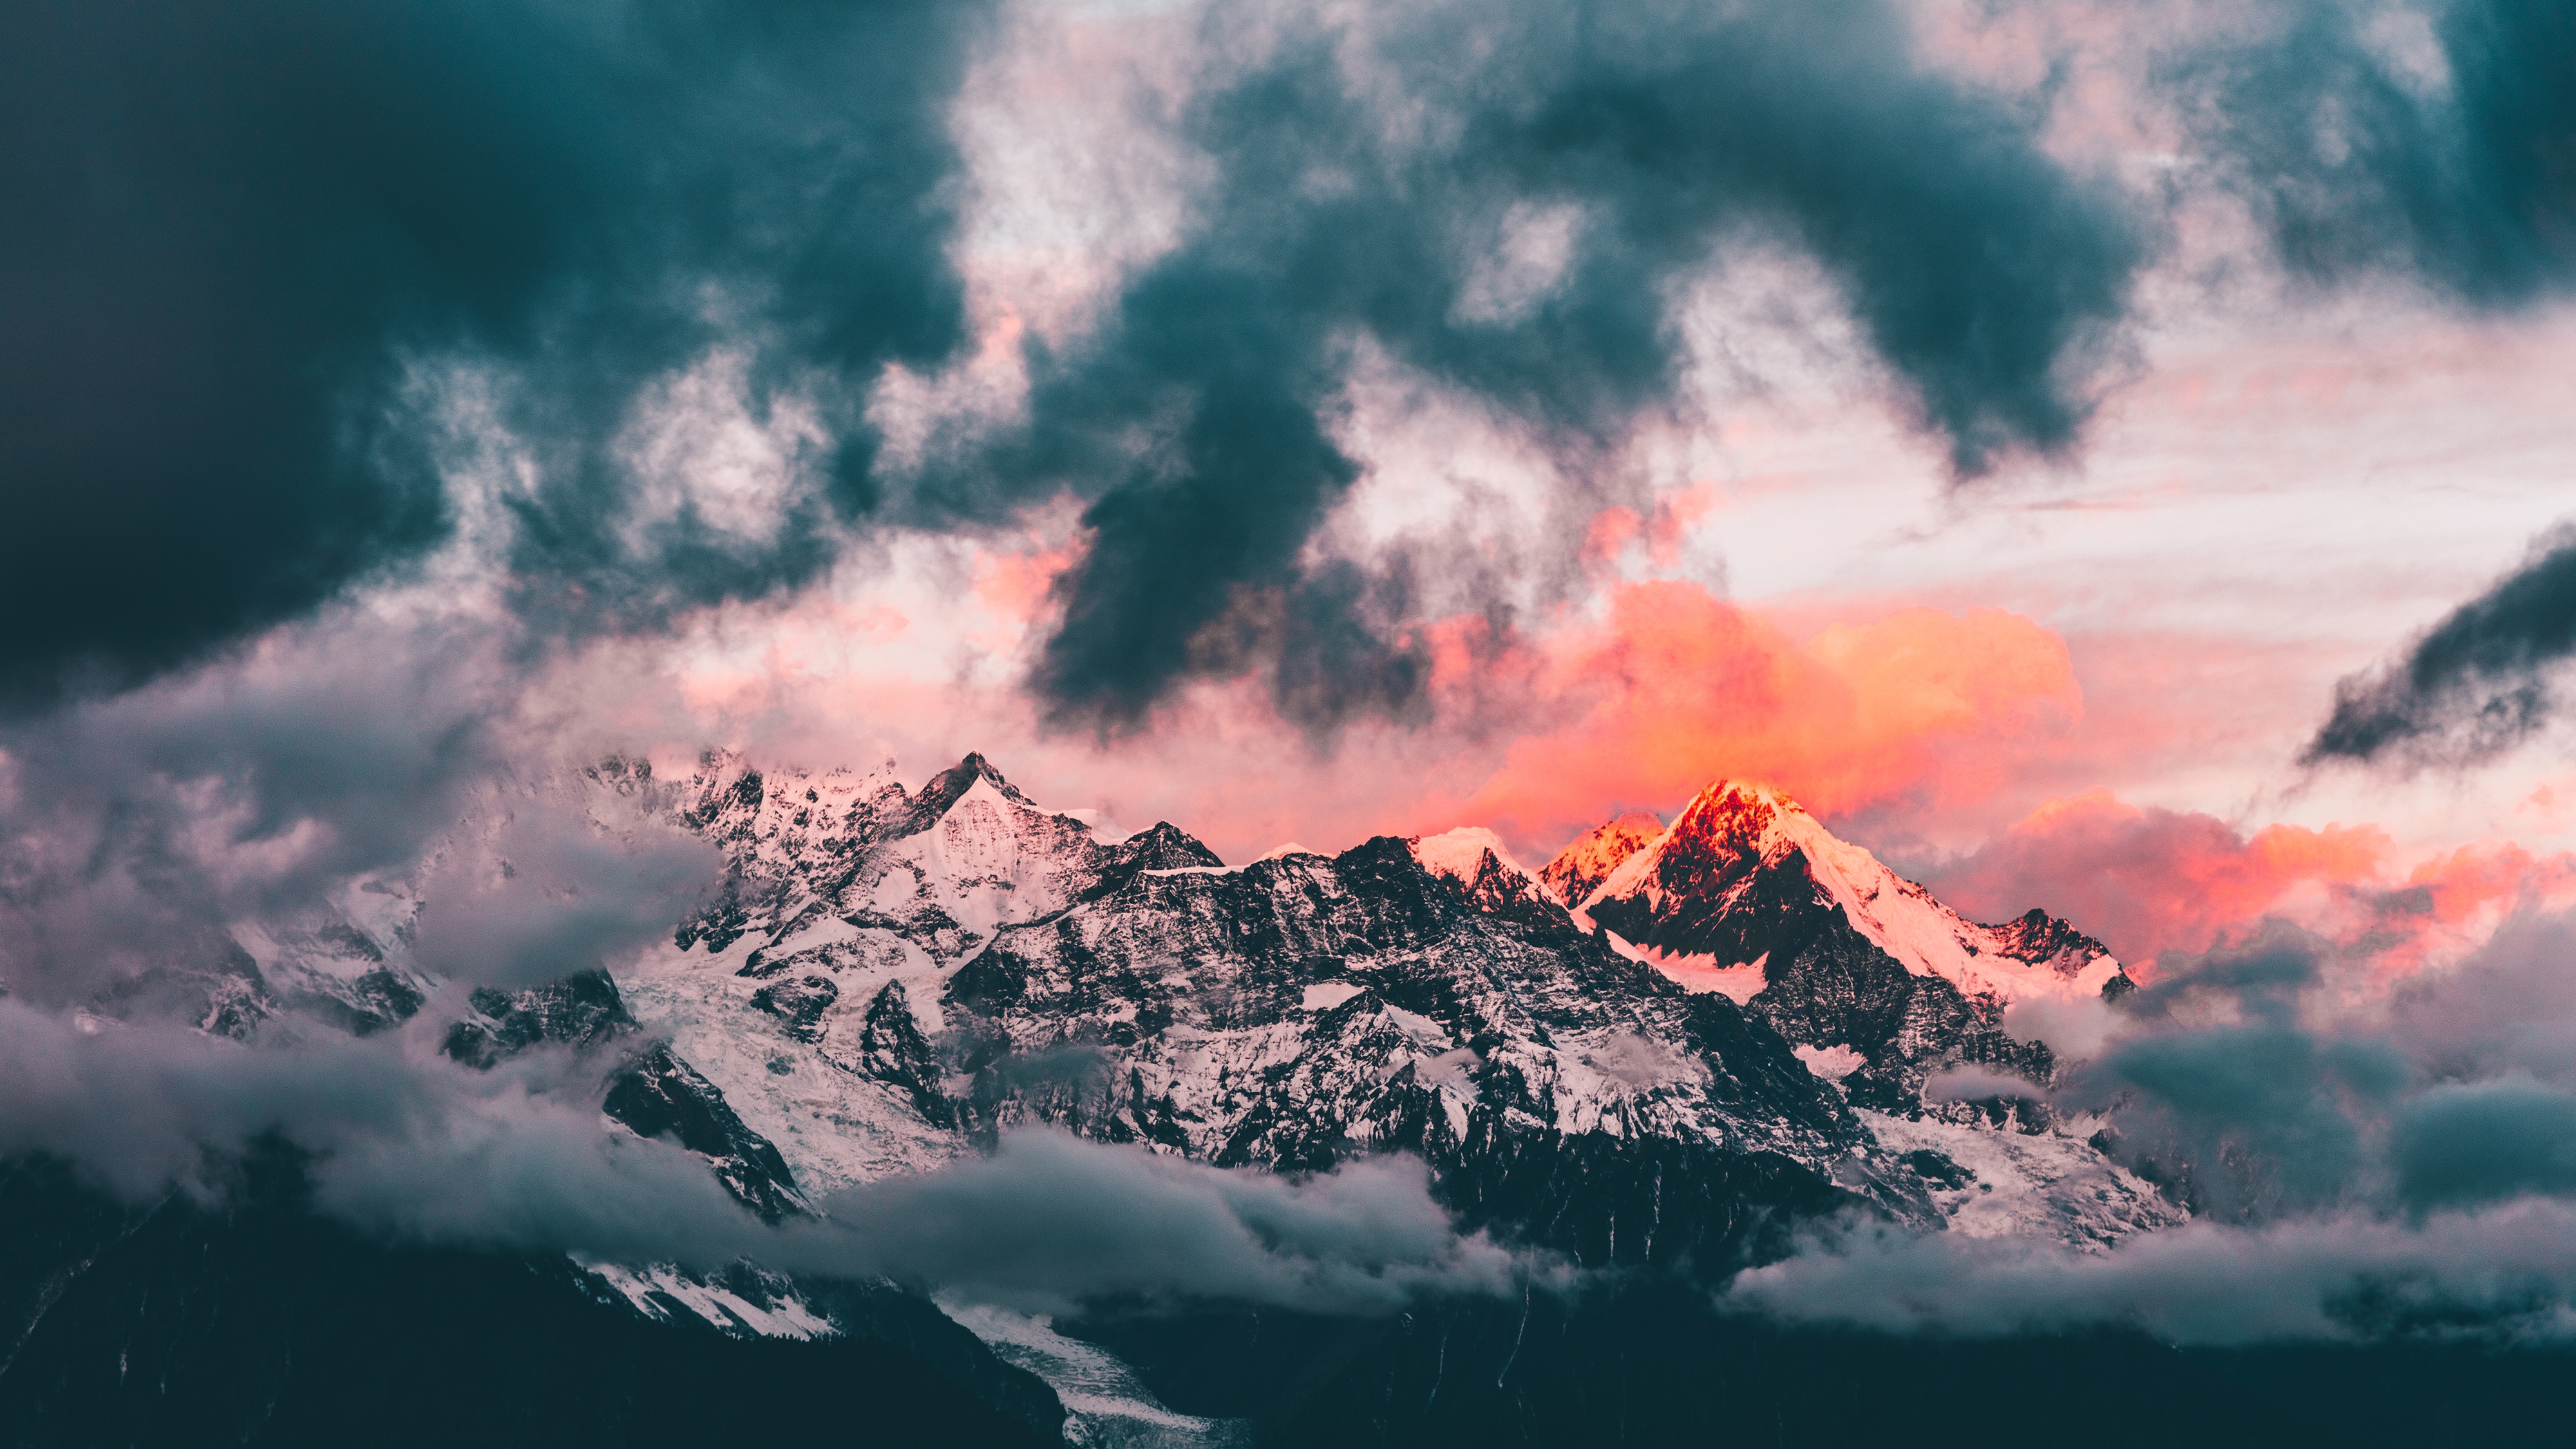 General 4000x2250 mountains clouds winter nature landscape sunset